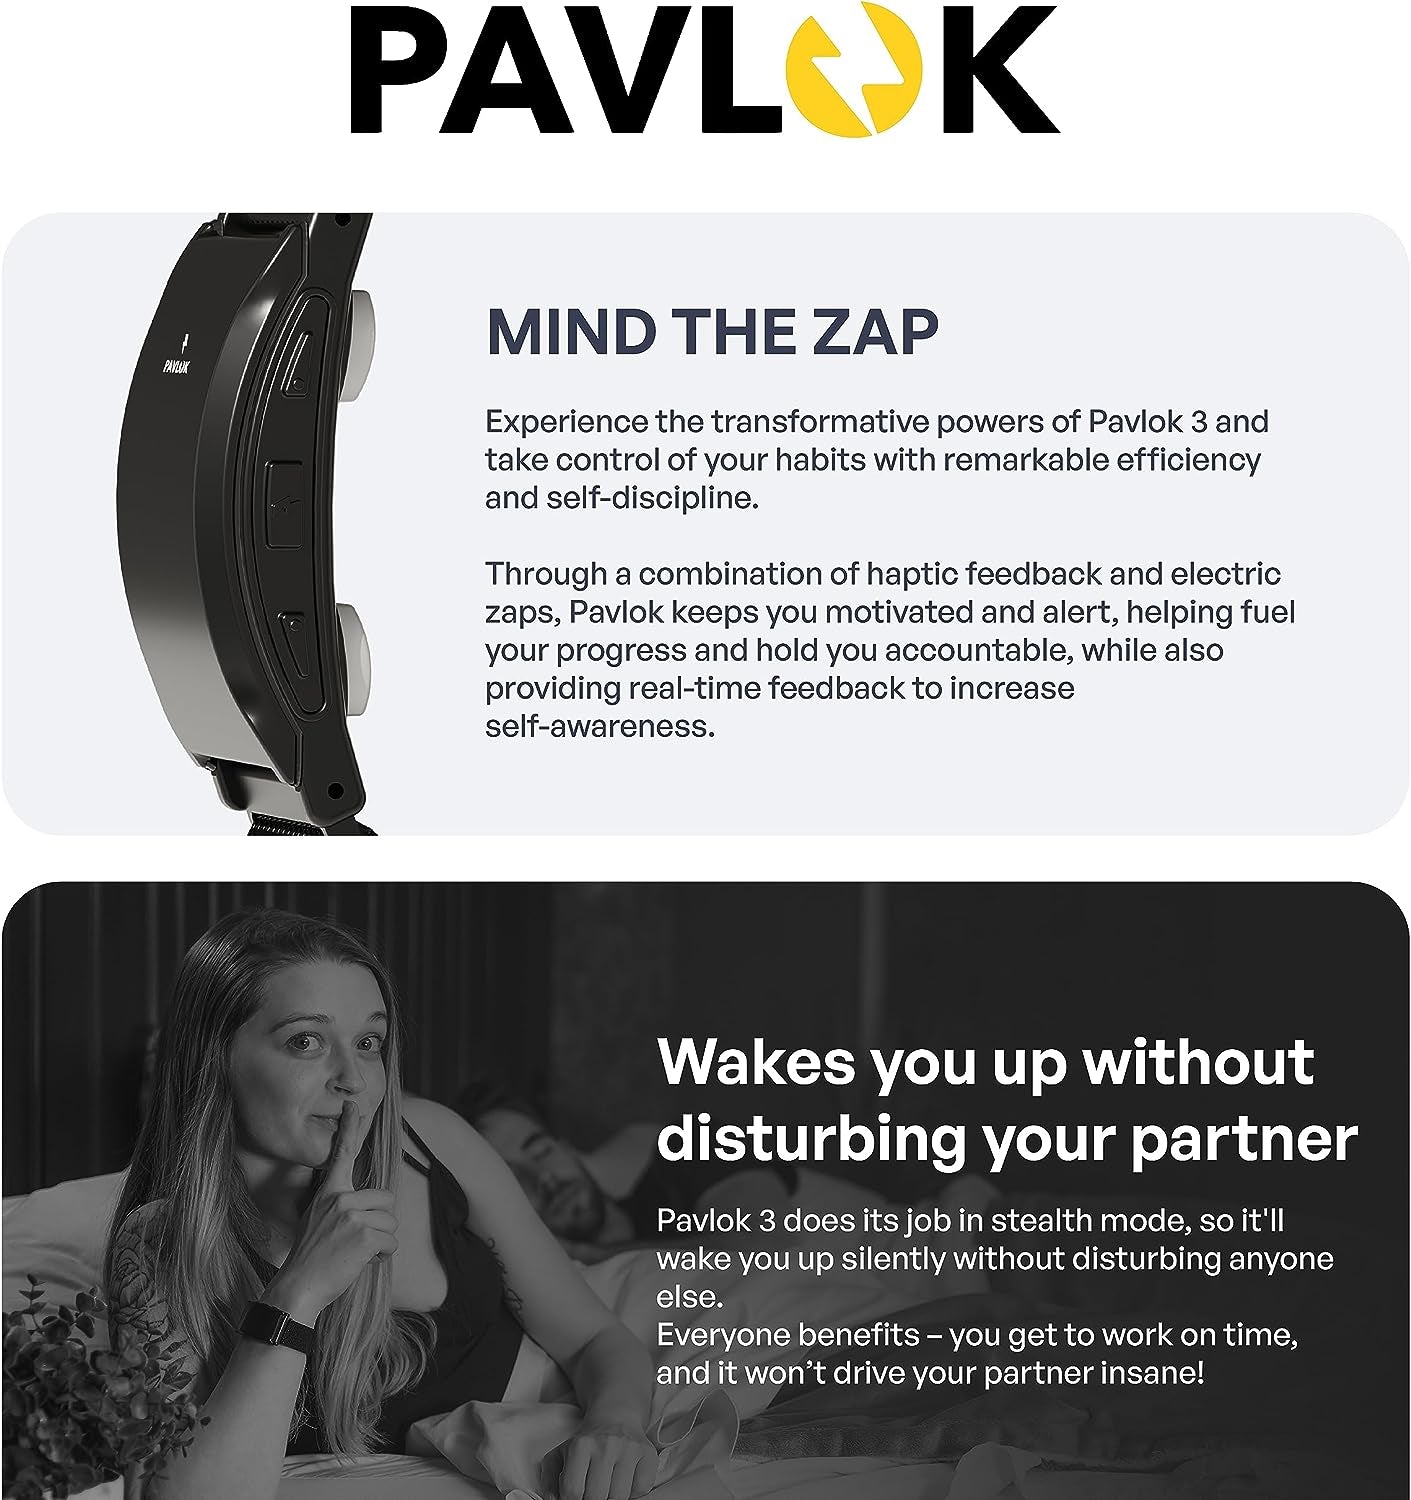 Pavlok 3 – a Personal Life Coach on Your Wrist – Practice Mindfulness and Build Good Habits – Track Your Steps, Activity, and Sleep Patterns! (Sports Edition)